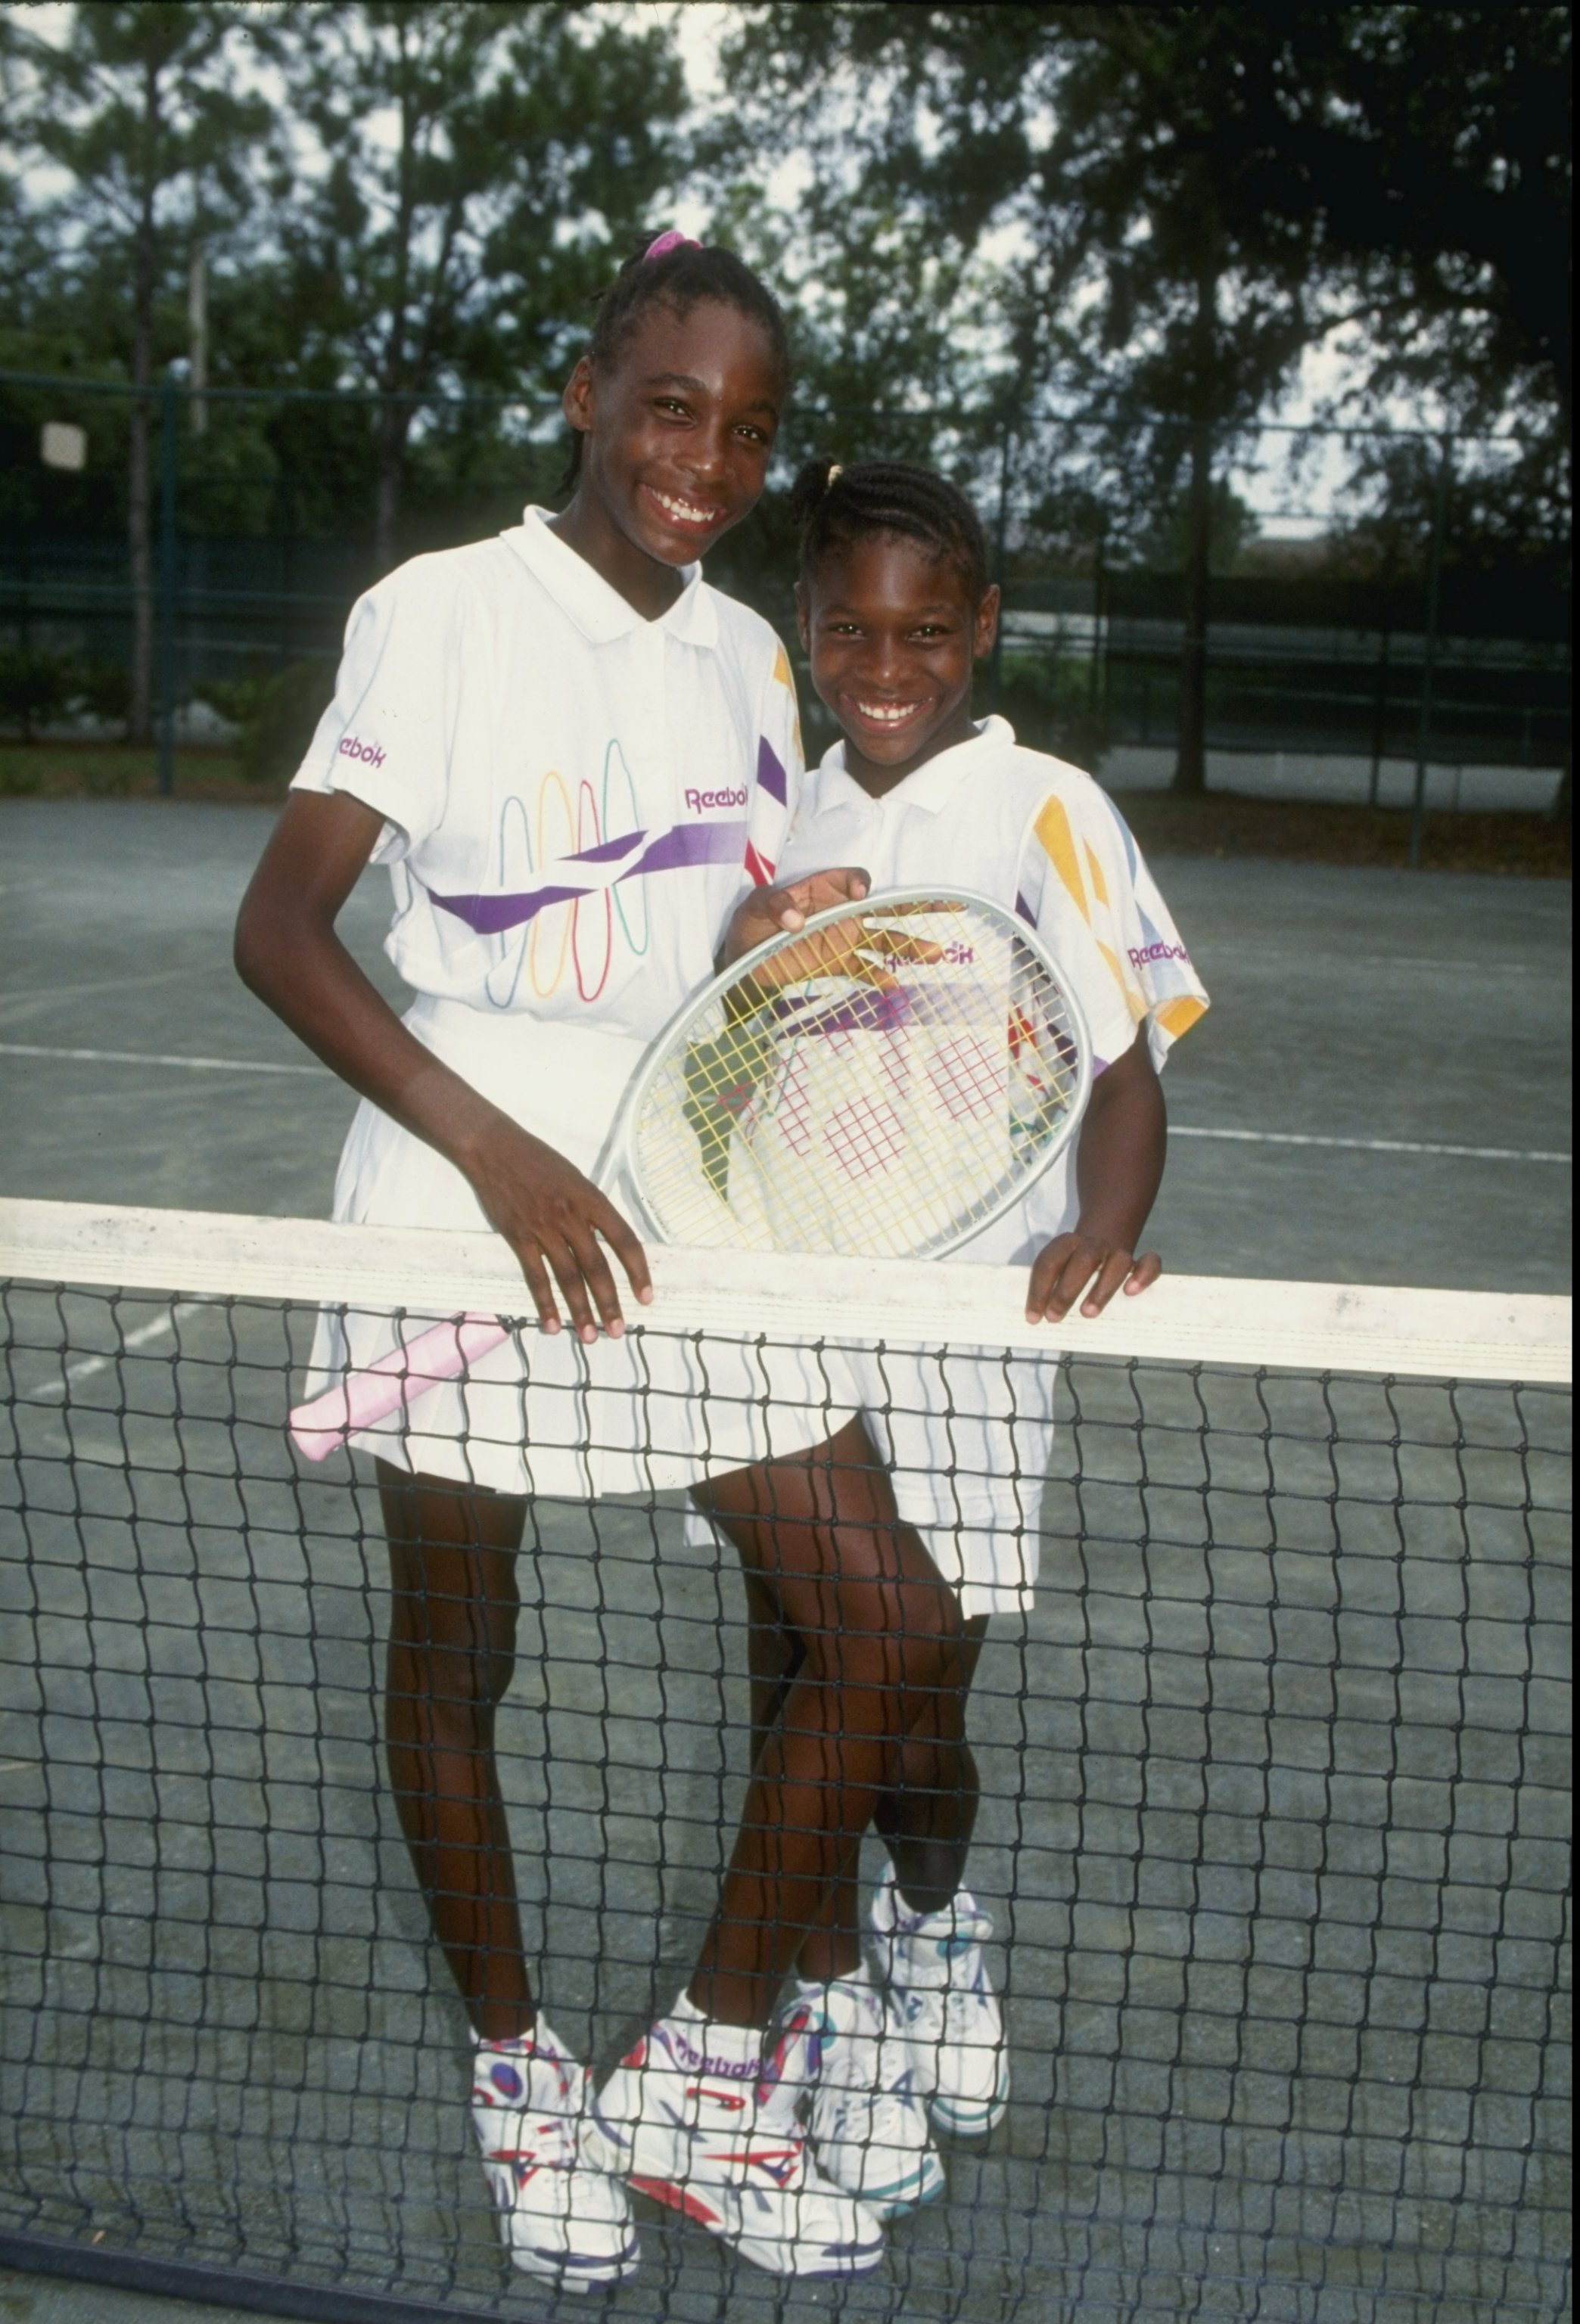 Serena Williams and her sister Venus takes a break while playing tennis in Florida in 1992. | Photo: Getty Images